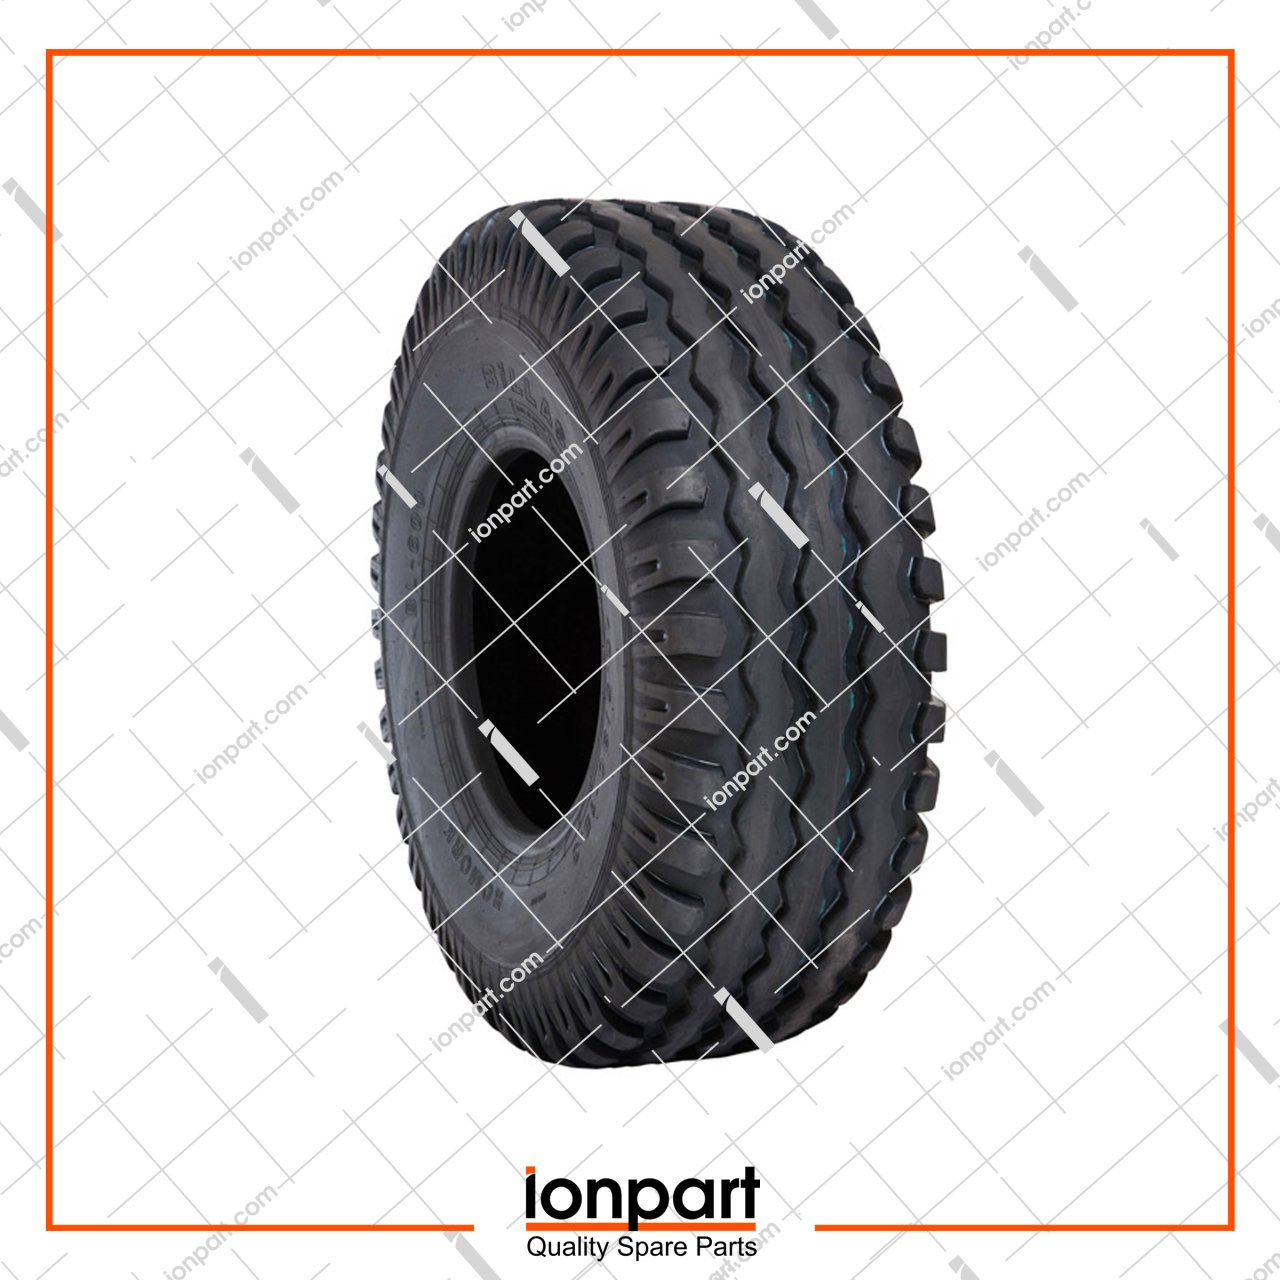 Wheel Tyre (10.0/80x12) Compatible With Gallignani